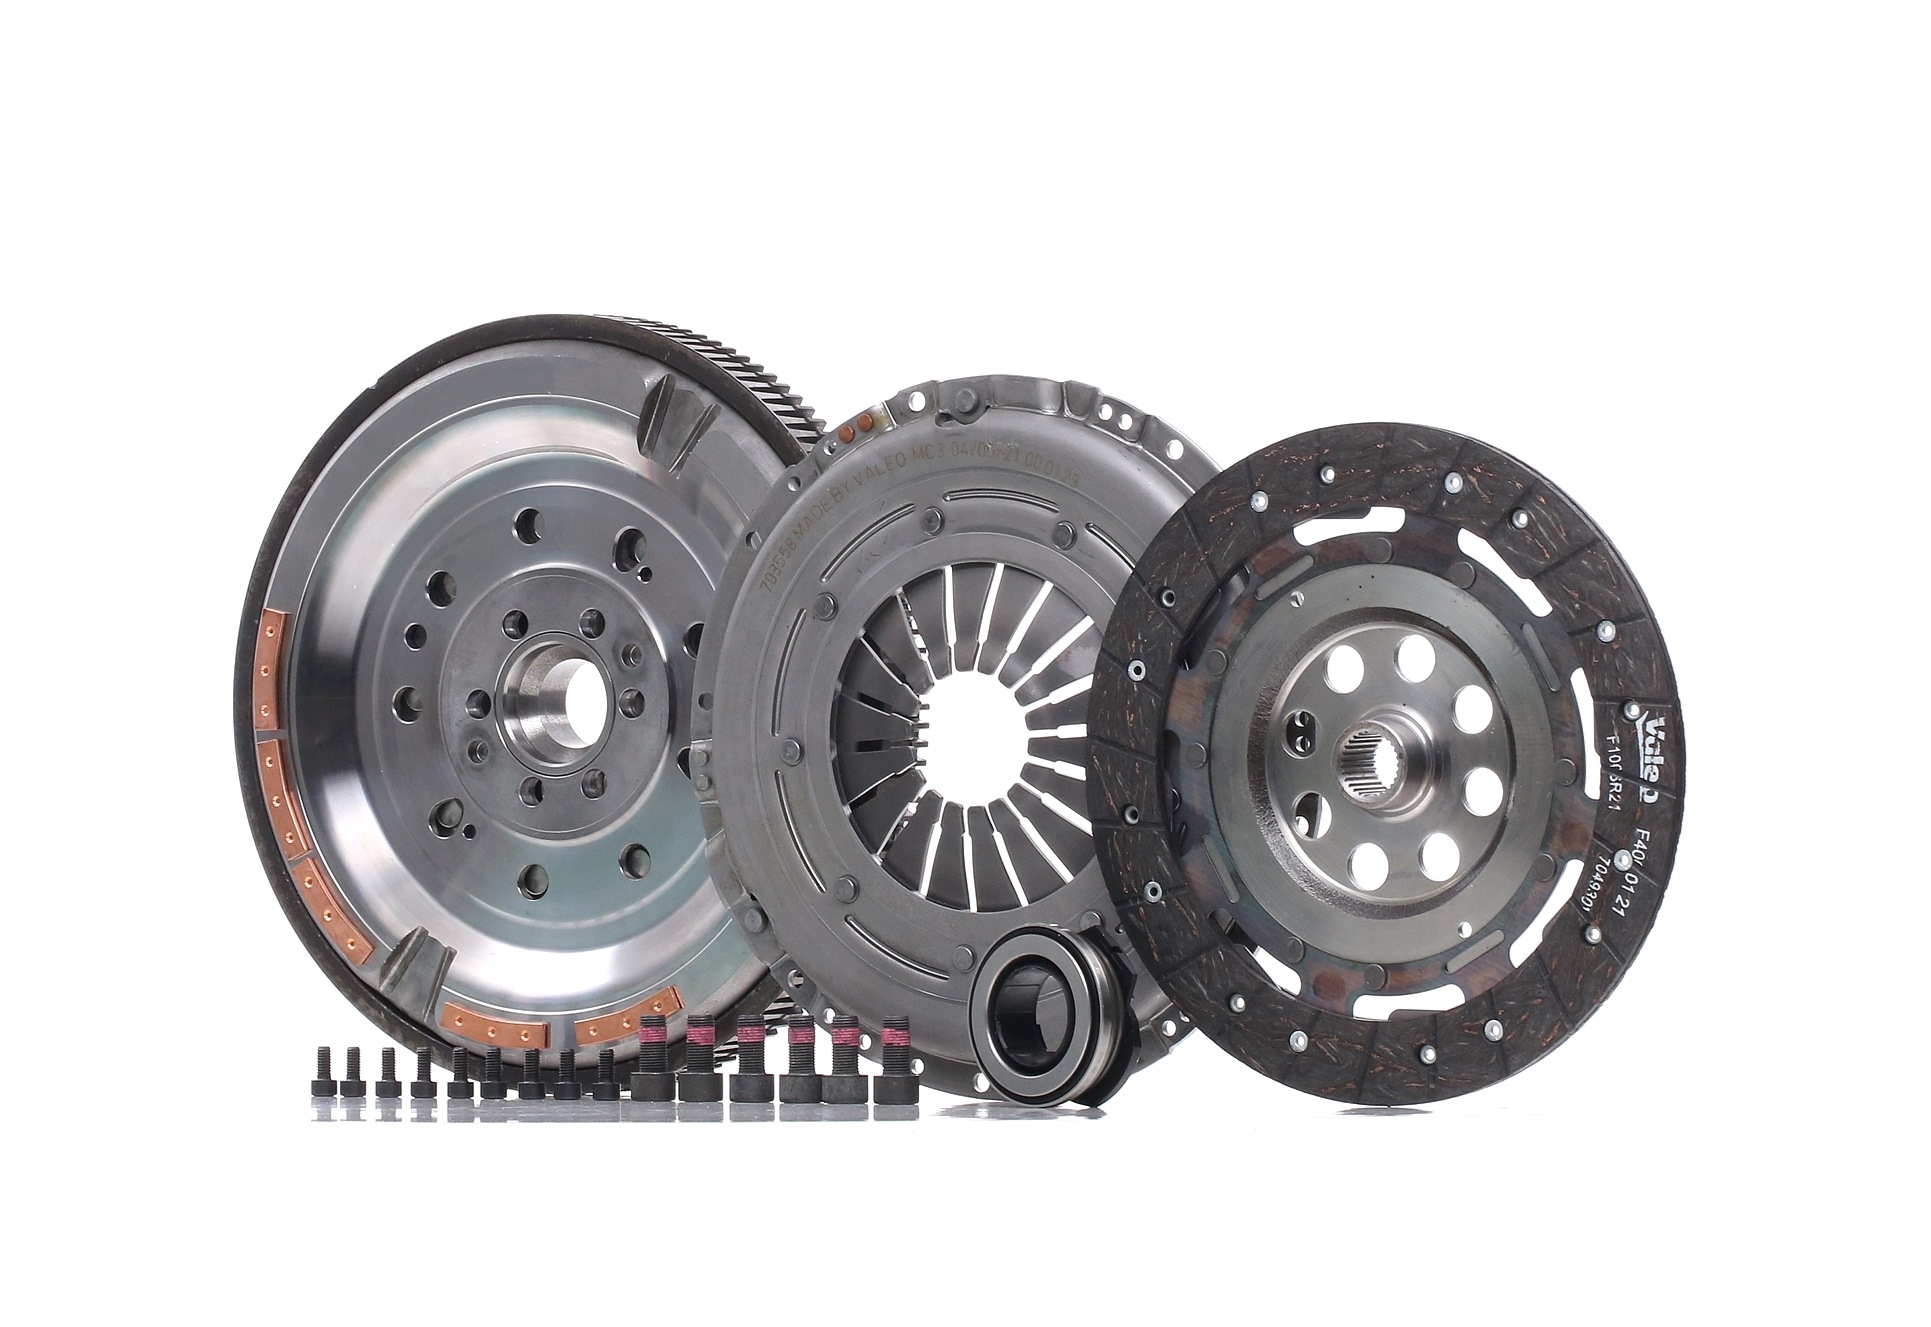 VALEO Clutch replacement kit Golf 4 Cabrio new 837017